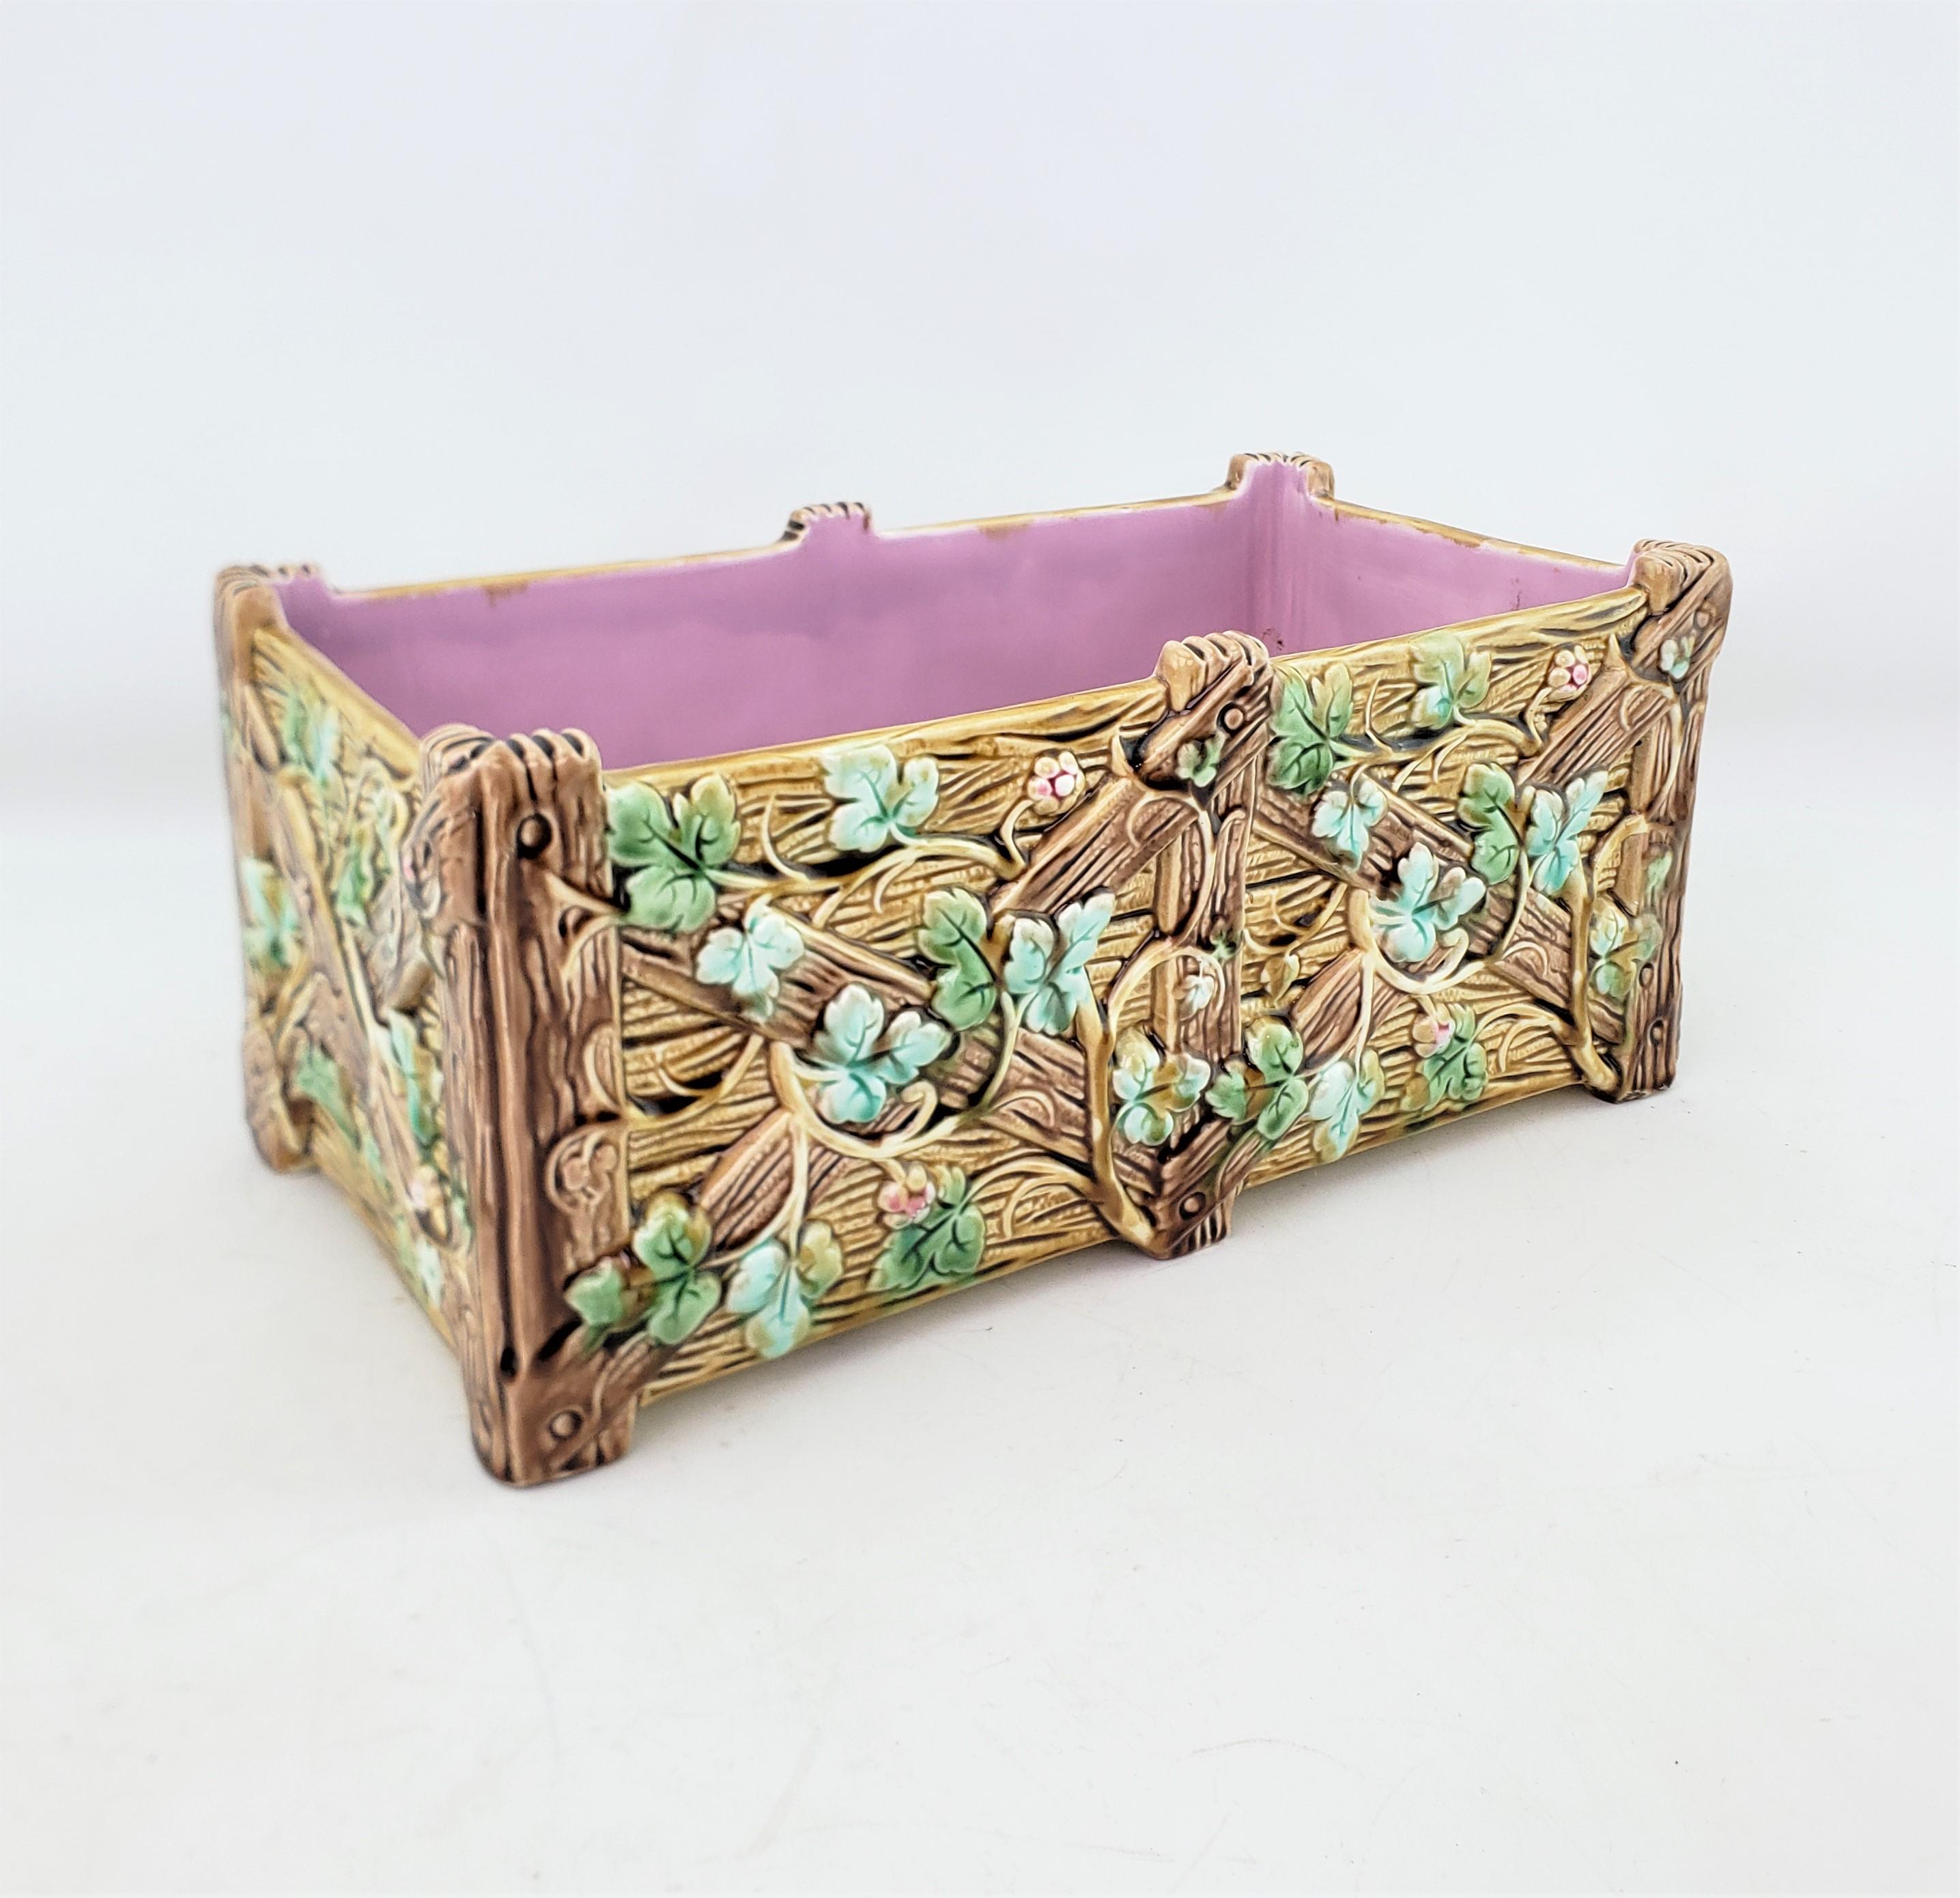 Molded Antique English Majolica Planter or Jardiniere with a Fence & Vine Motif For Sale